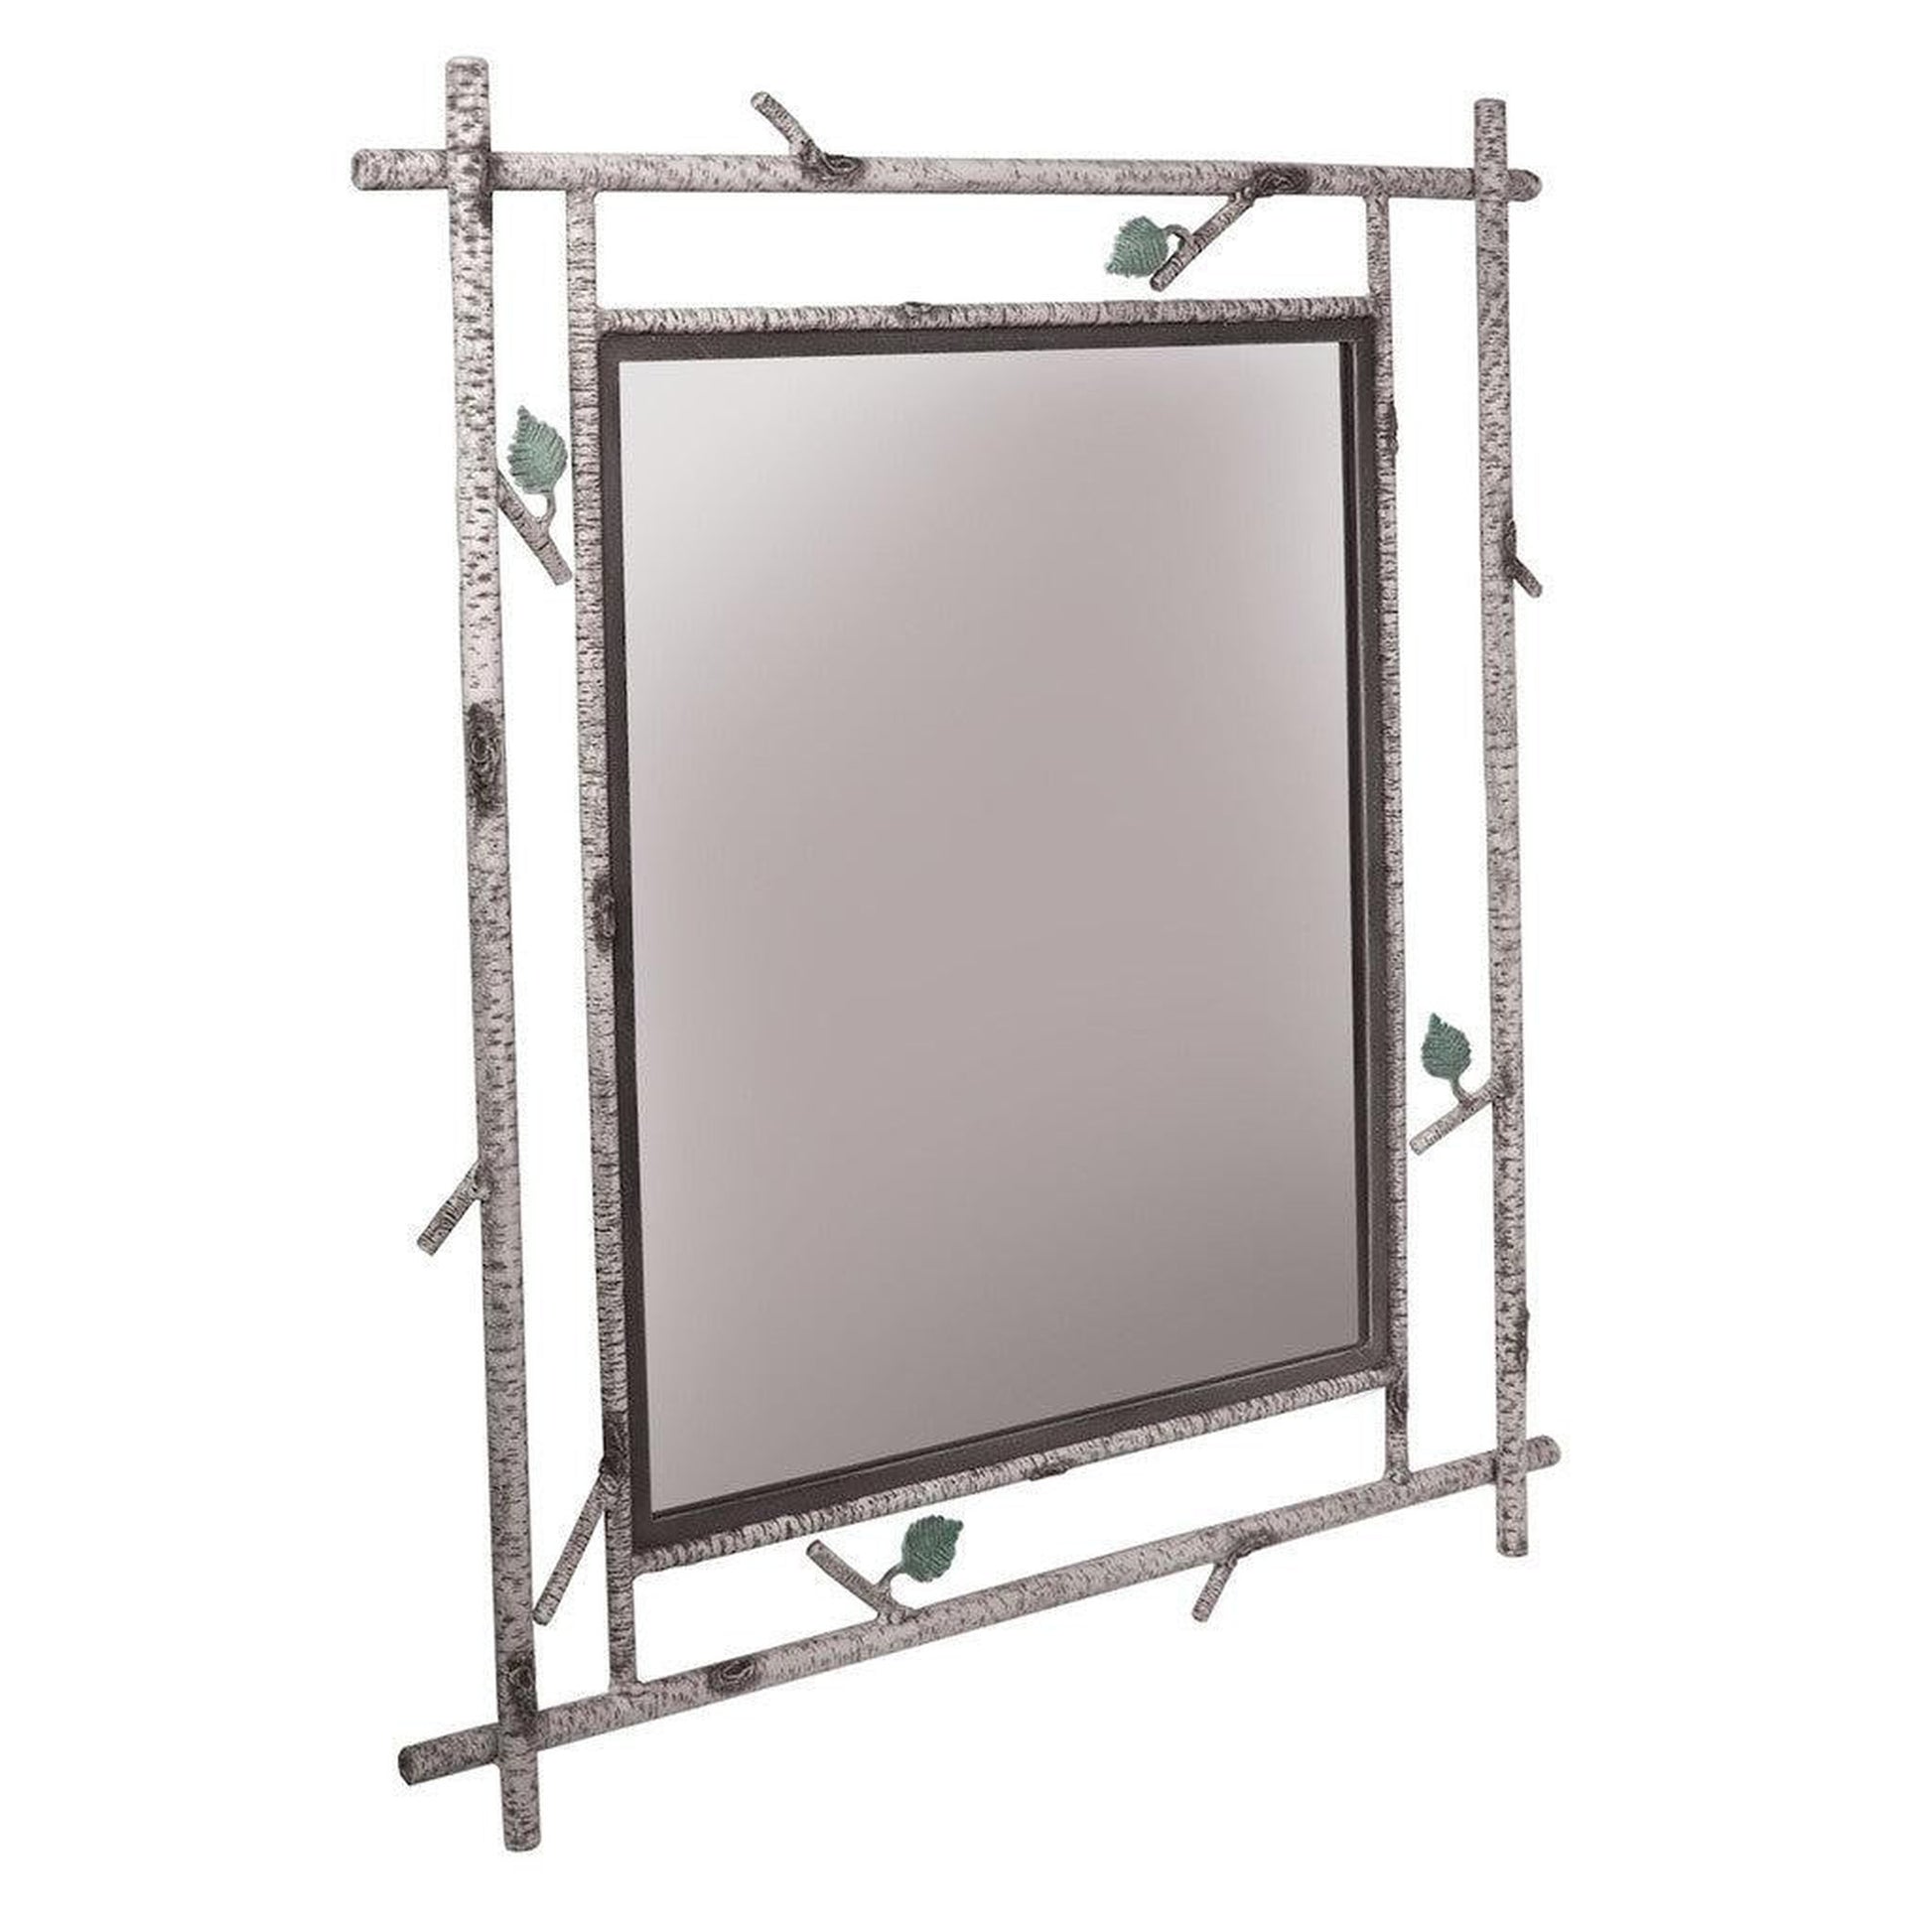 Stone County Ironworks Whisper Creek 35" x 47" Large Hand Rubbed Bronze Iron Wall Mirror With Copper Iron Accent